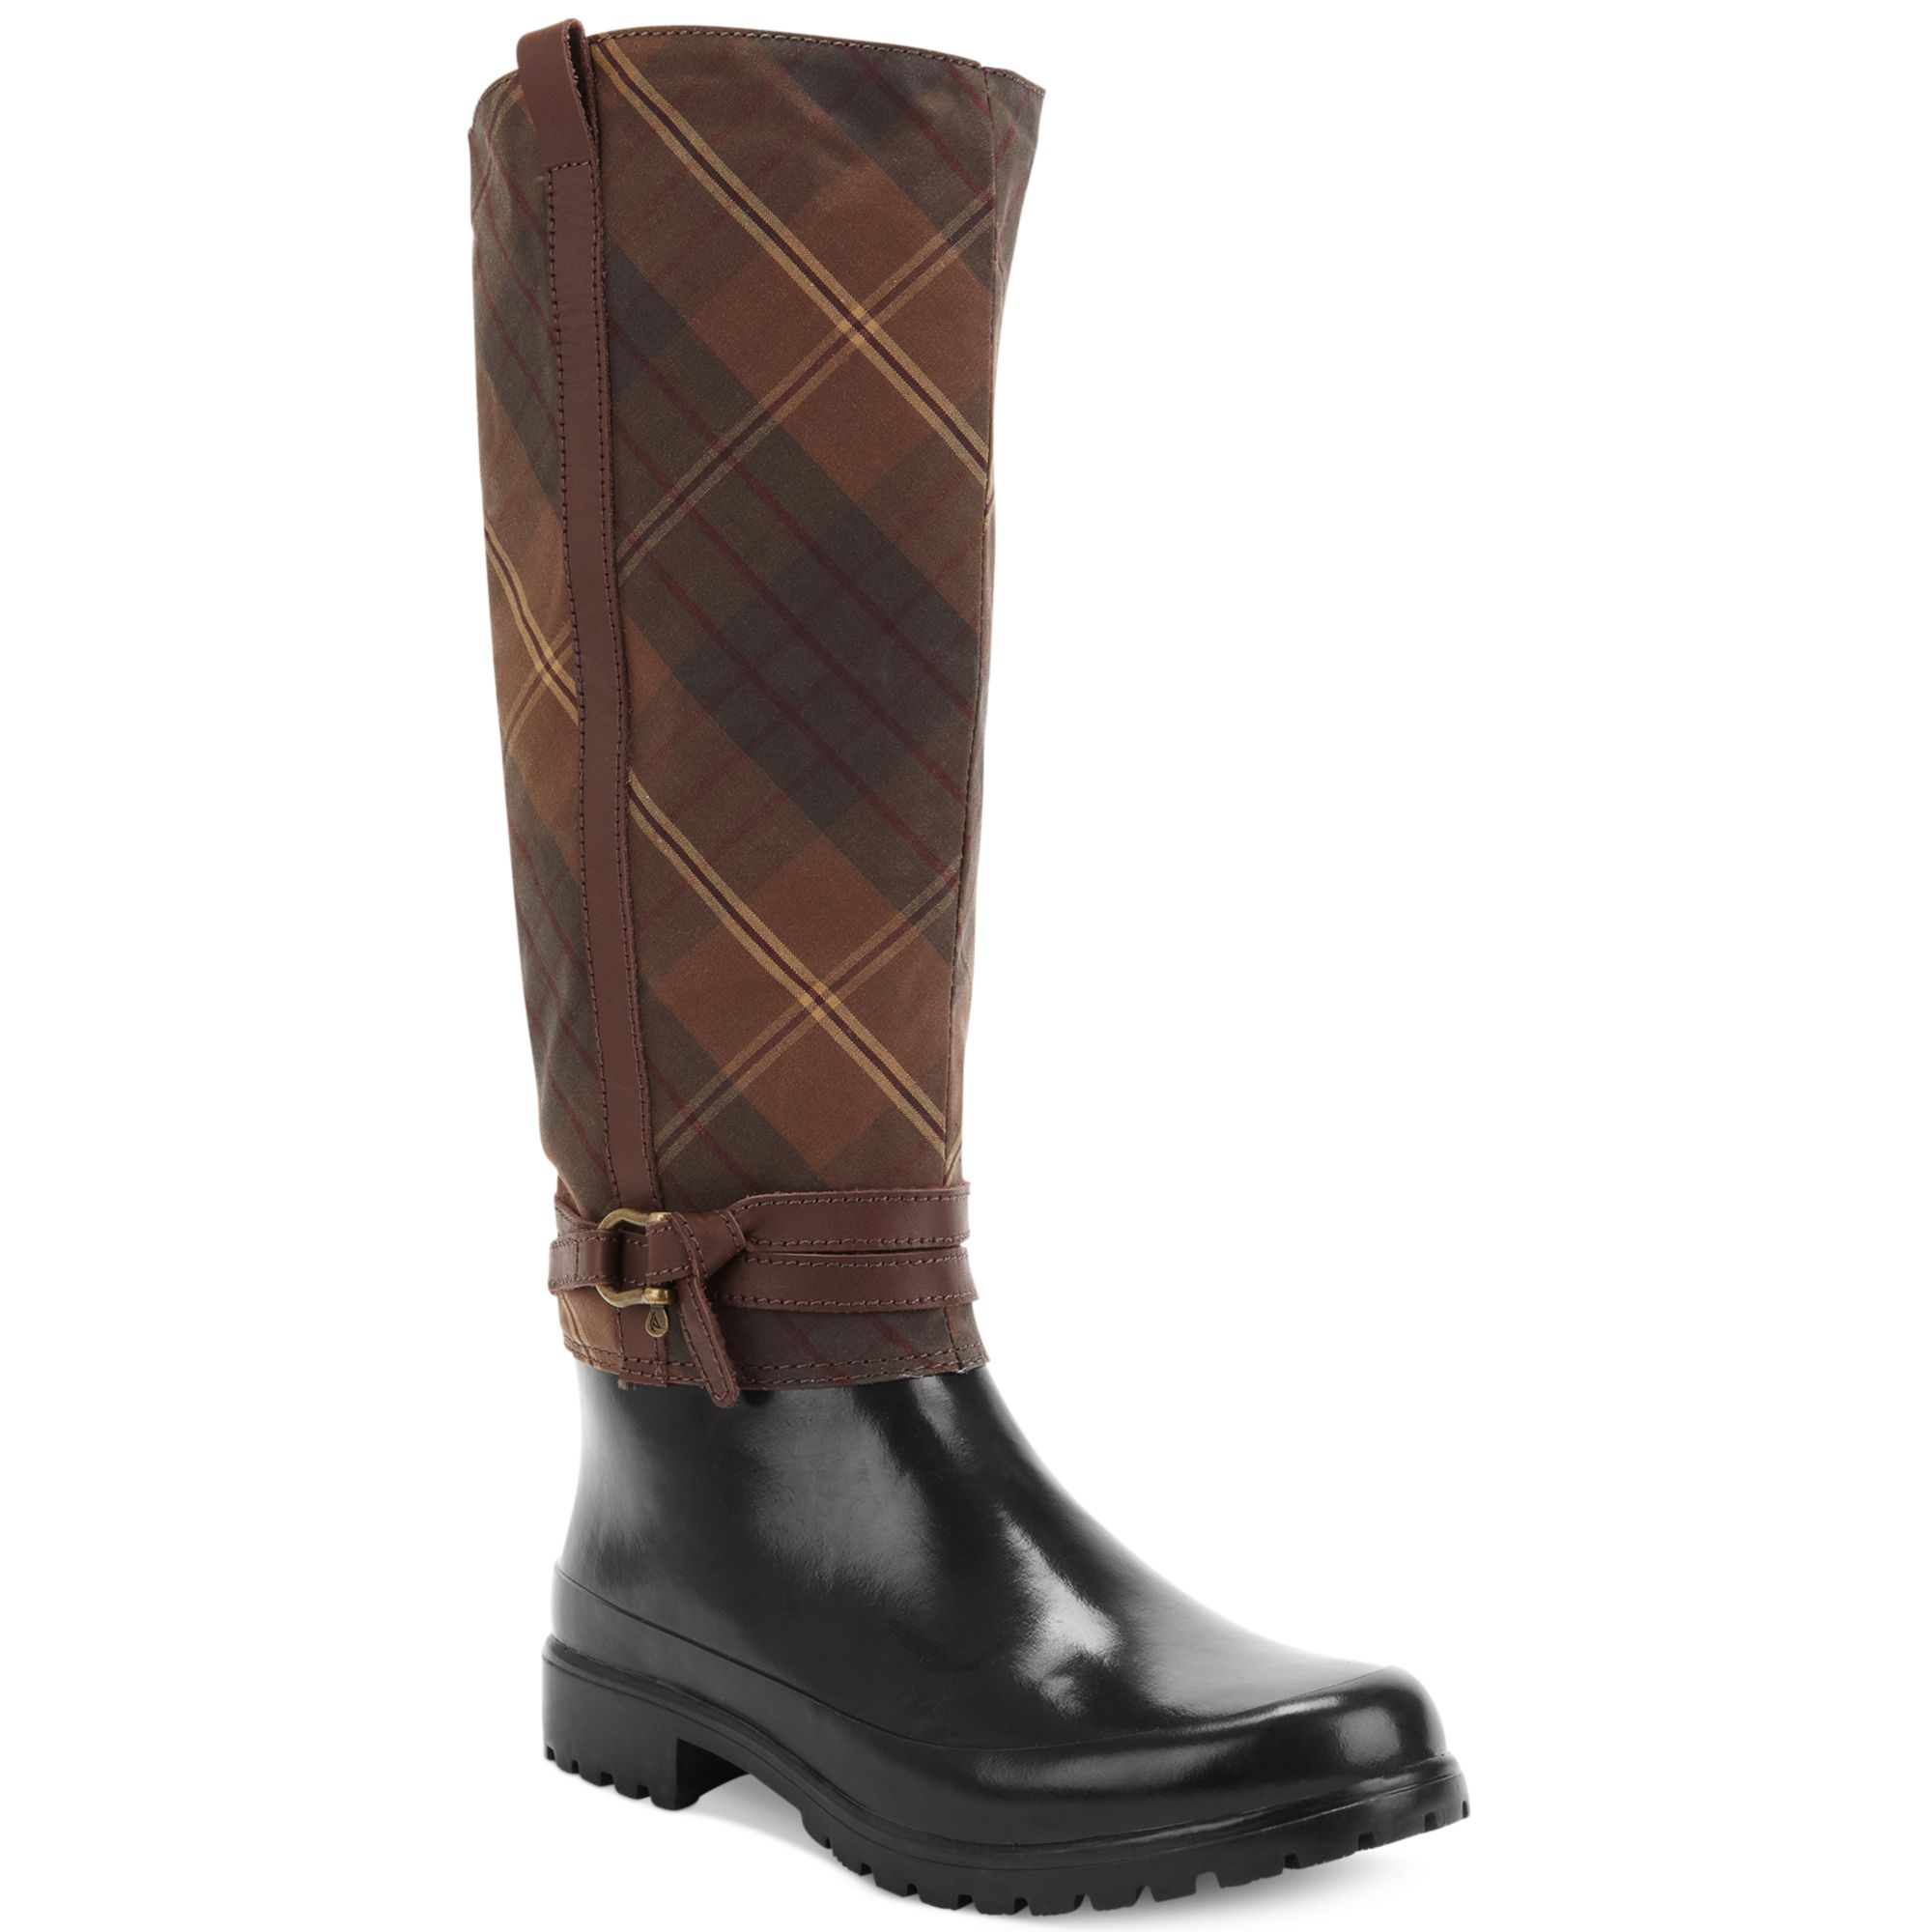 Sperry Top-Sider Women'S Everham Tall Rain Boots in Brown - Lyst